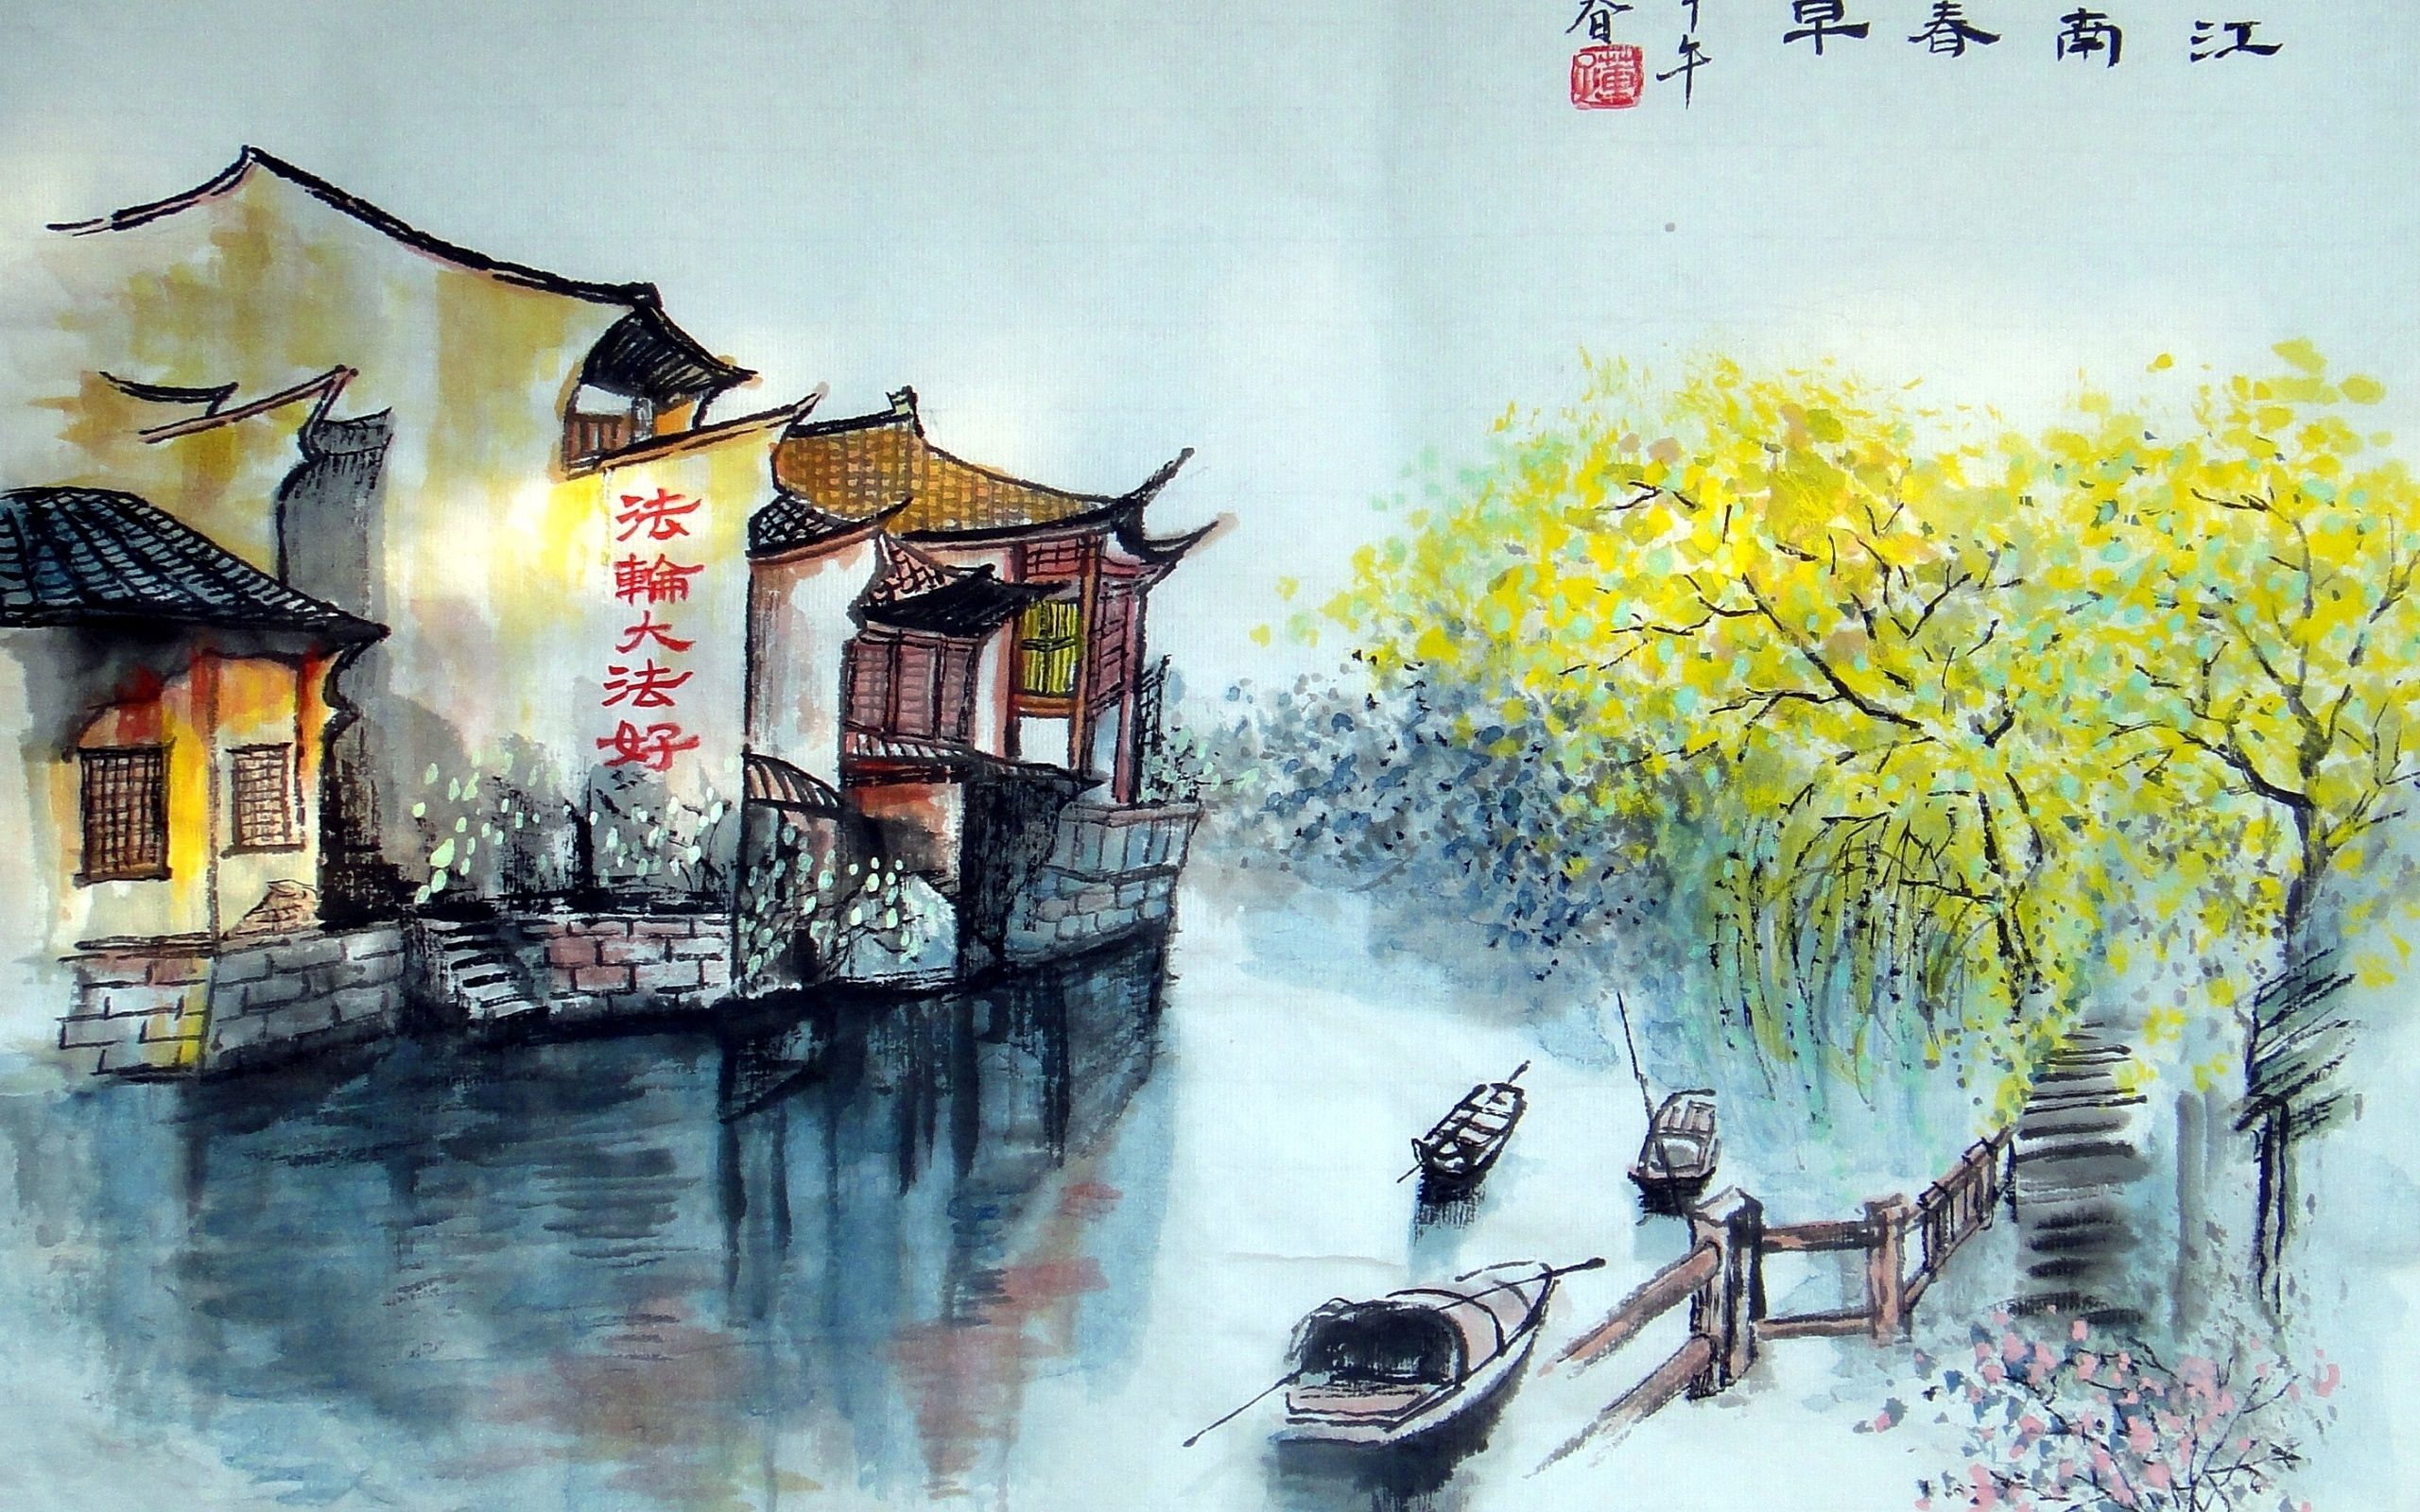 Sketchy fashion. Chinese landscape, Chinese landscape painting, Landscape wallpaper